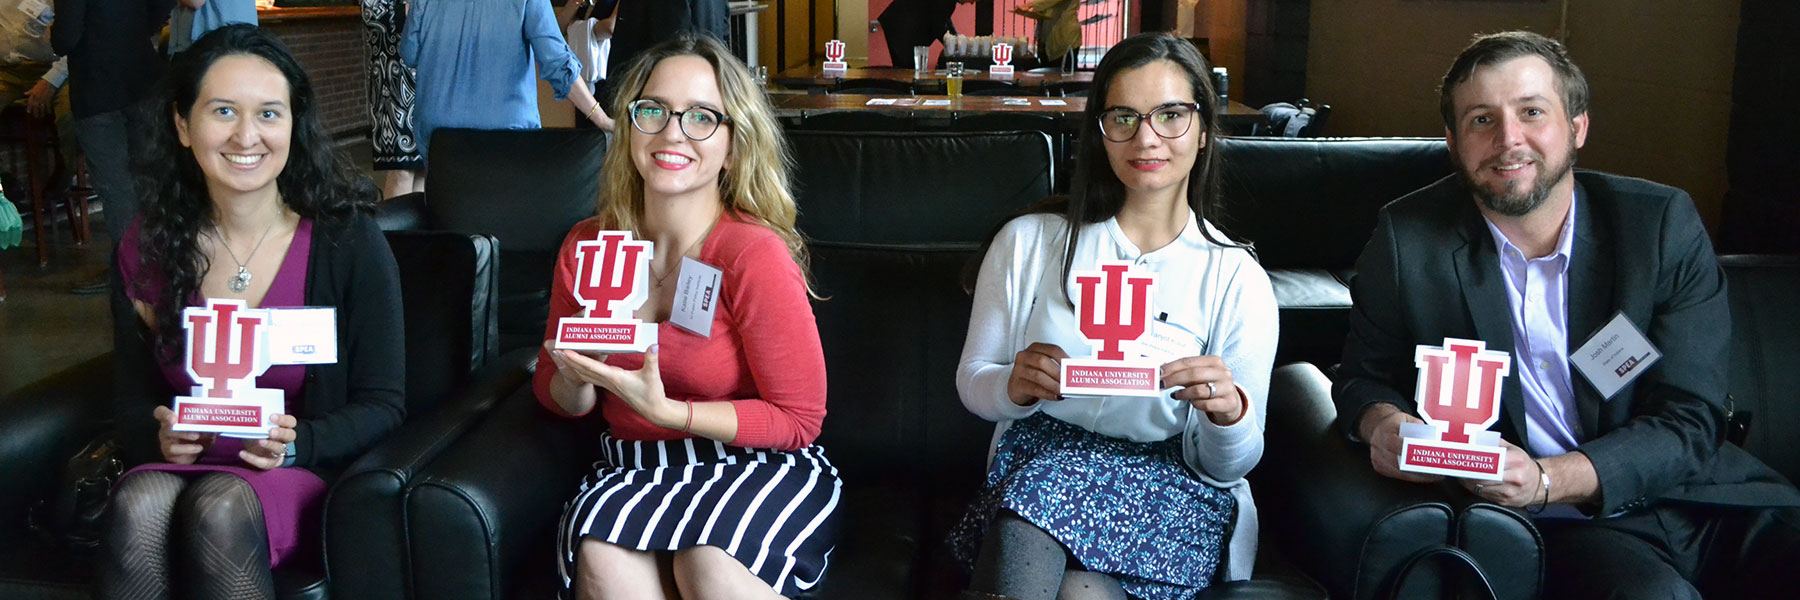 SPEA Alumni Association members smile and hold IU trident placards.